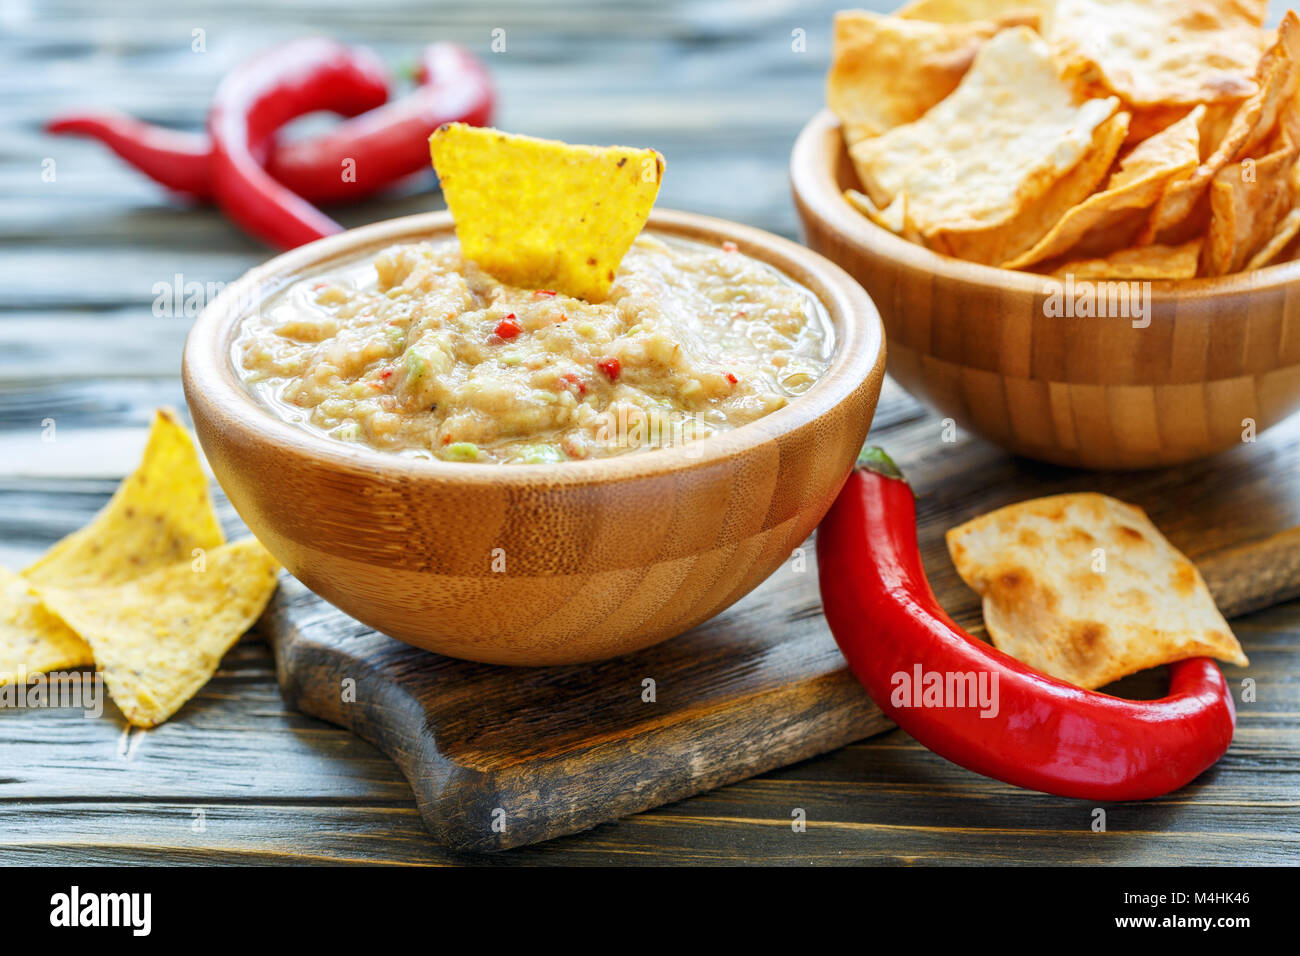 Guacamole in a wooden bowl and with tortilla chips. Stock Photo